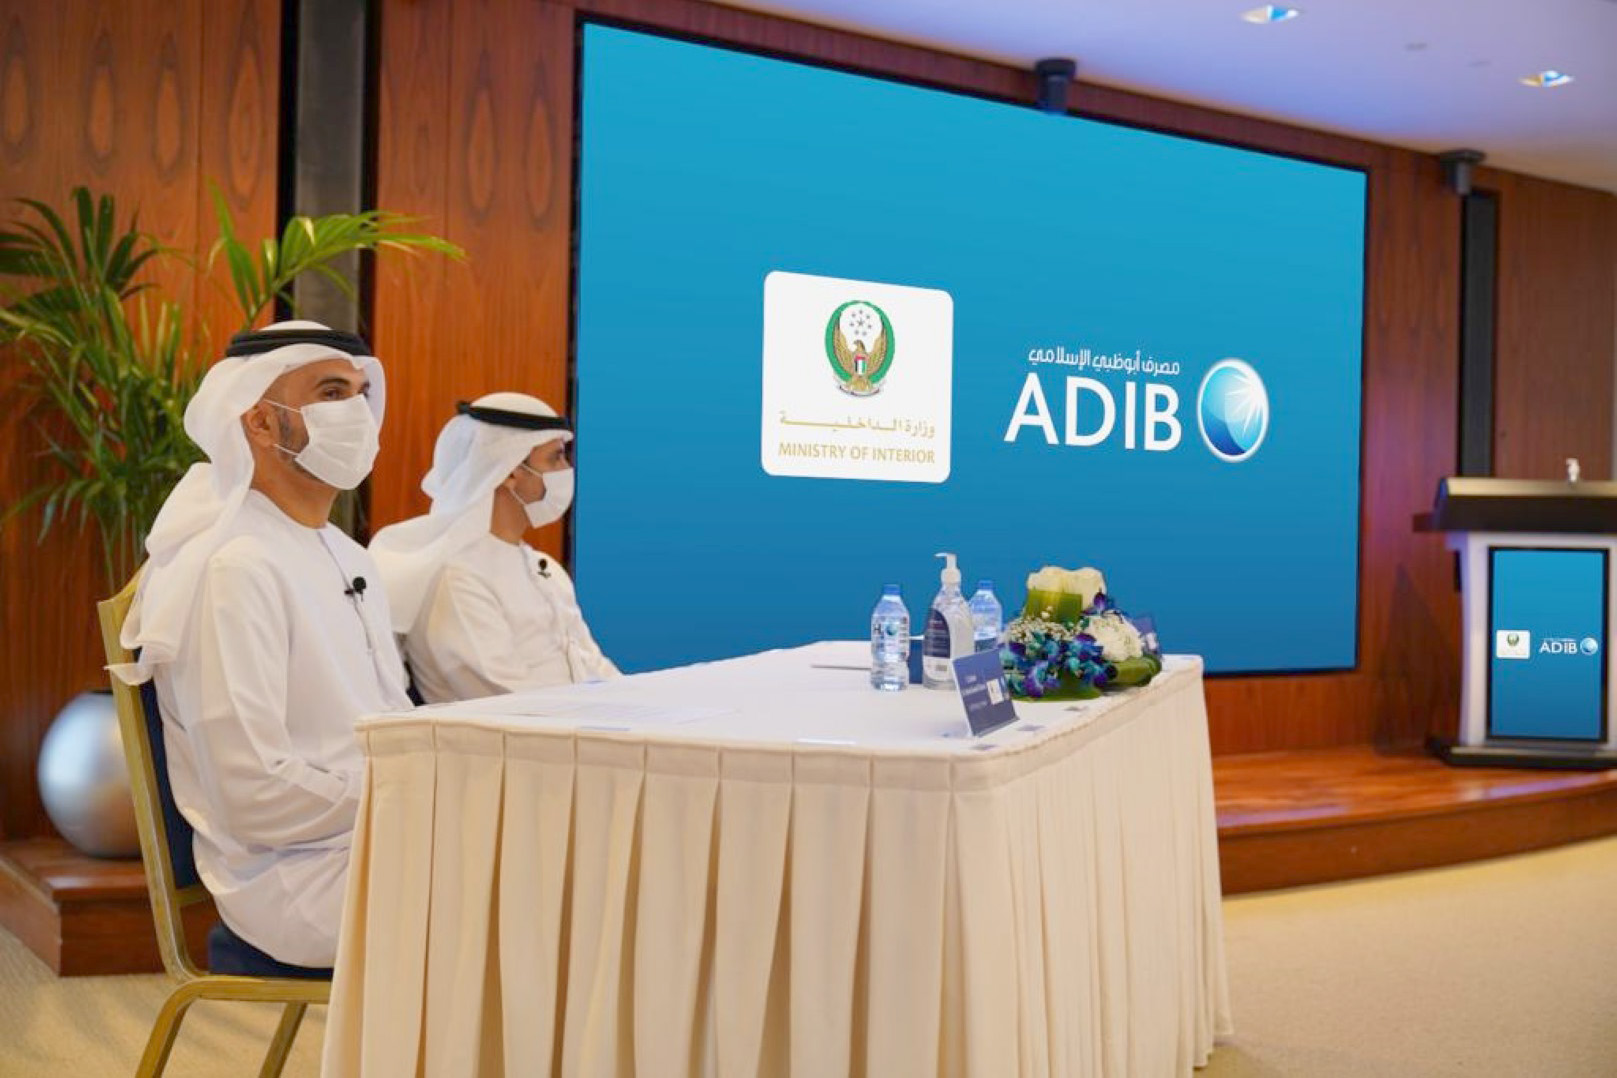 ADIB Becomes First UAE Bank To Use Facial Recognition For Instant, Secure Account Opening